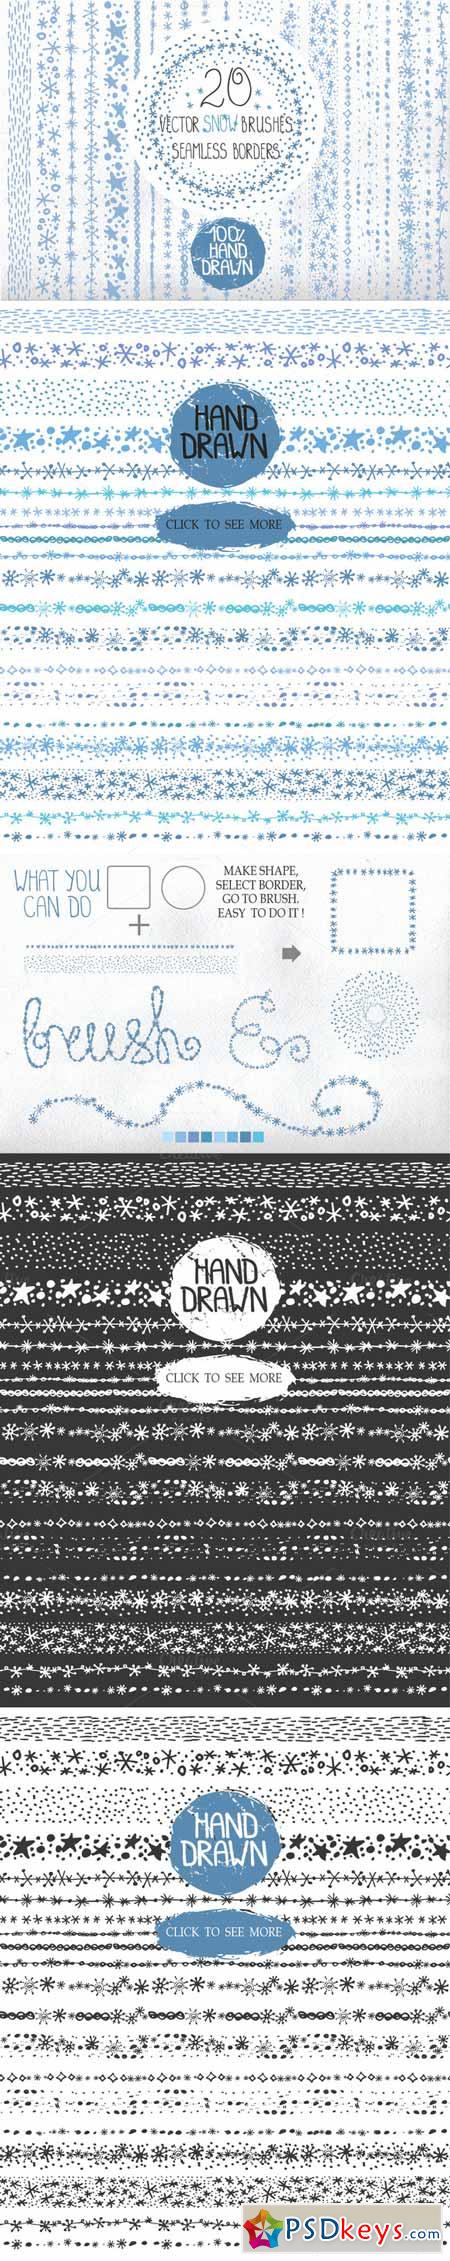 Hand drawn snow borders,brushes 467866